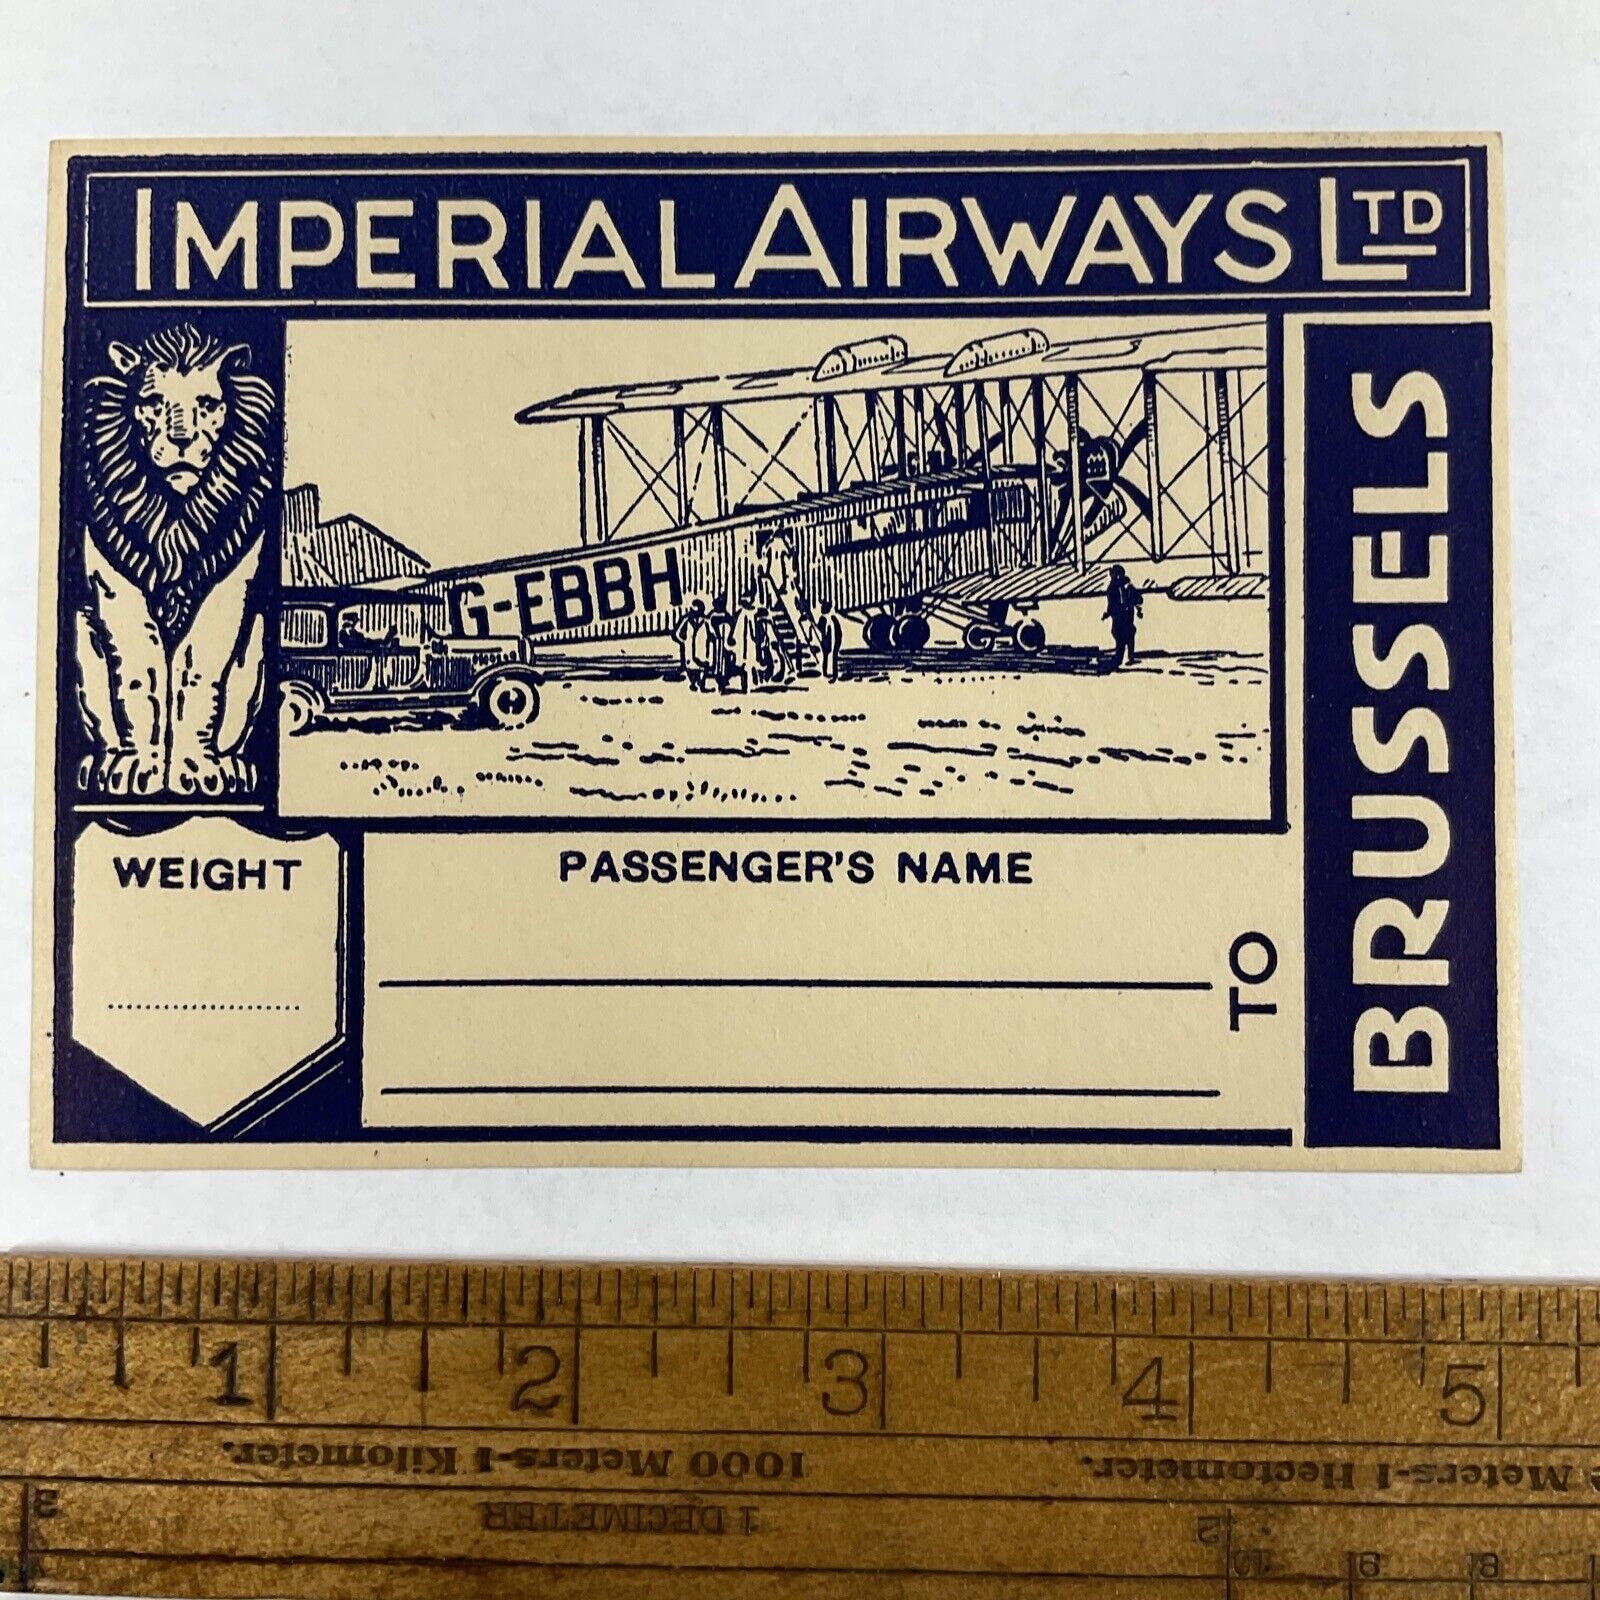 Imperial Airways Ltd to Brussels Luggage Label Tag Early Aviation Label c 1920s